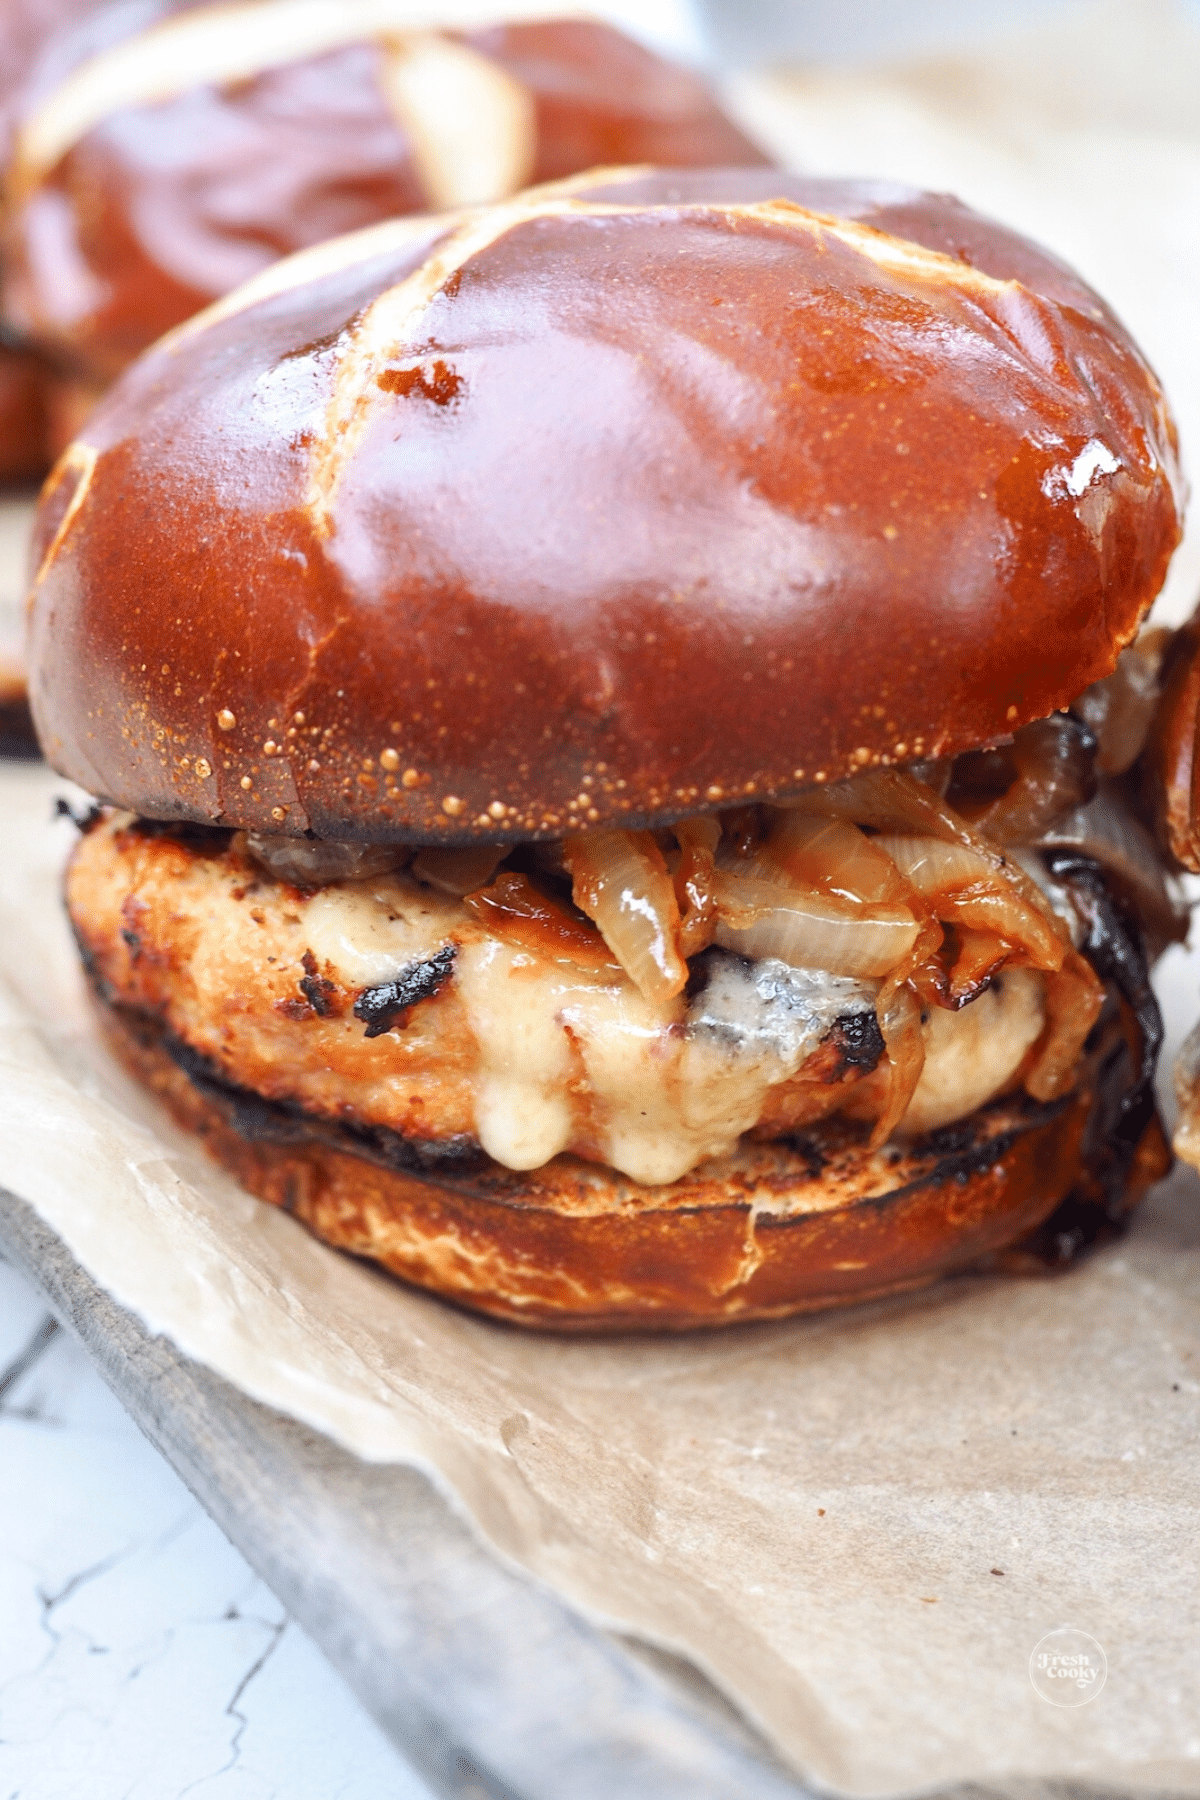 Turkey burger slathered with grilled onions.